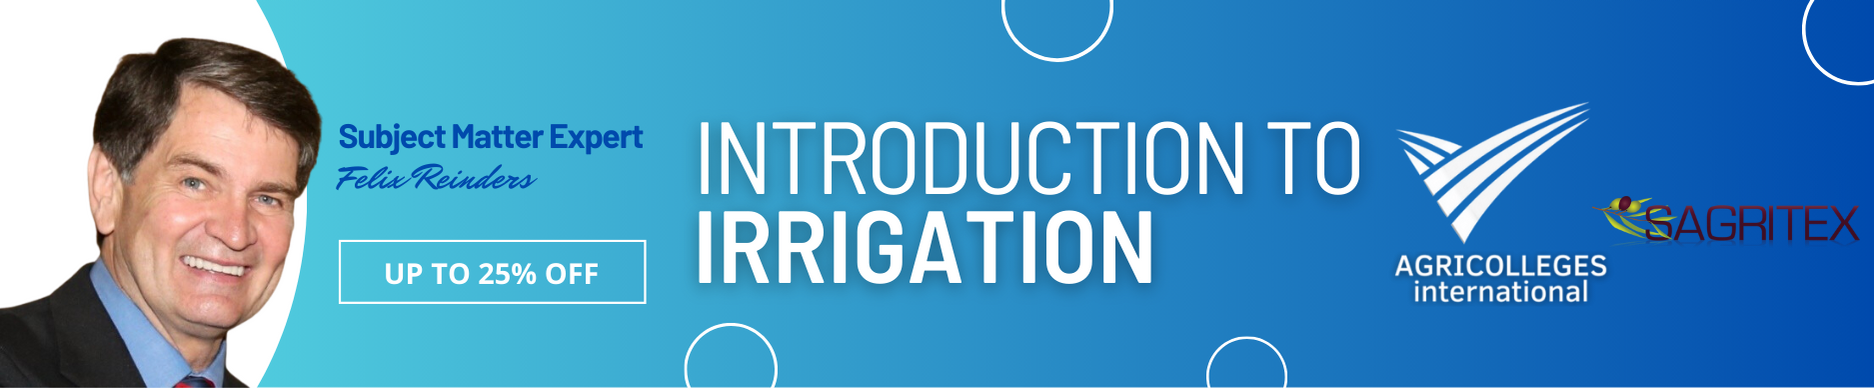 introduction-to-irrigation